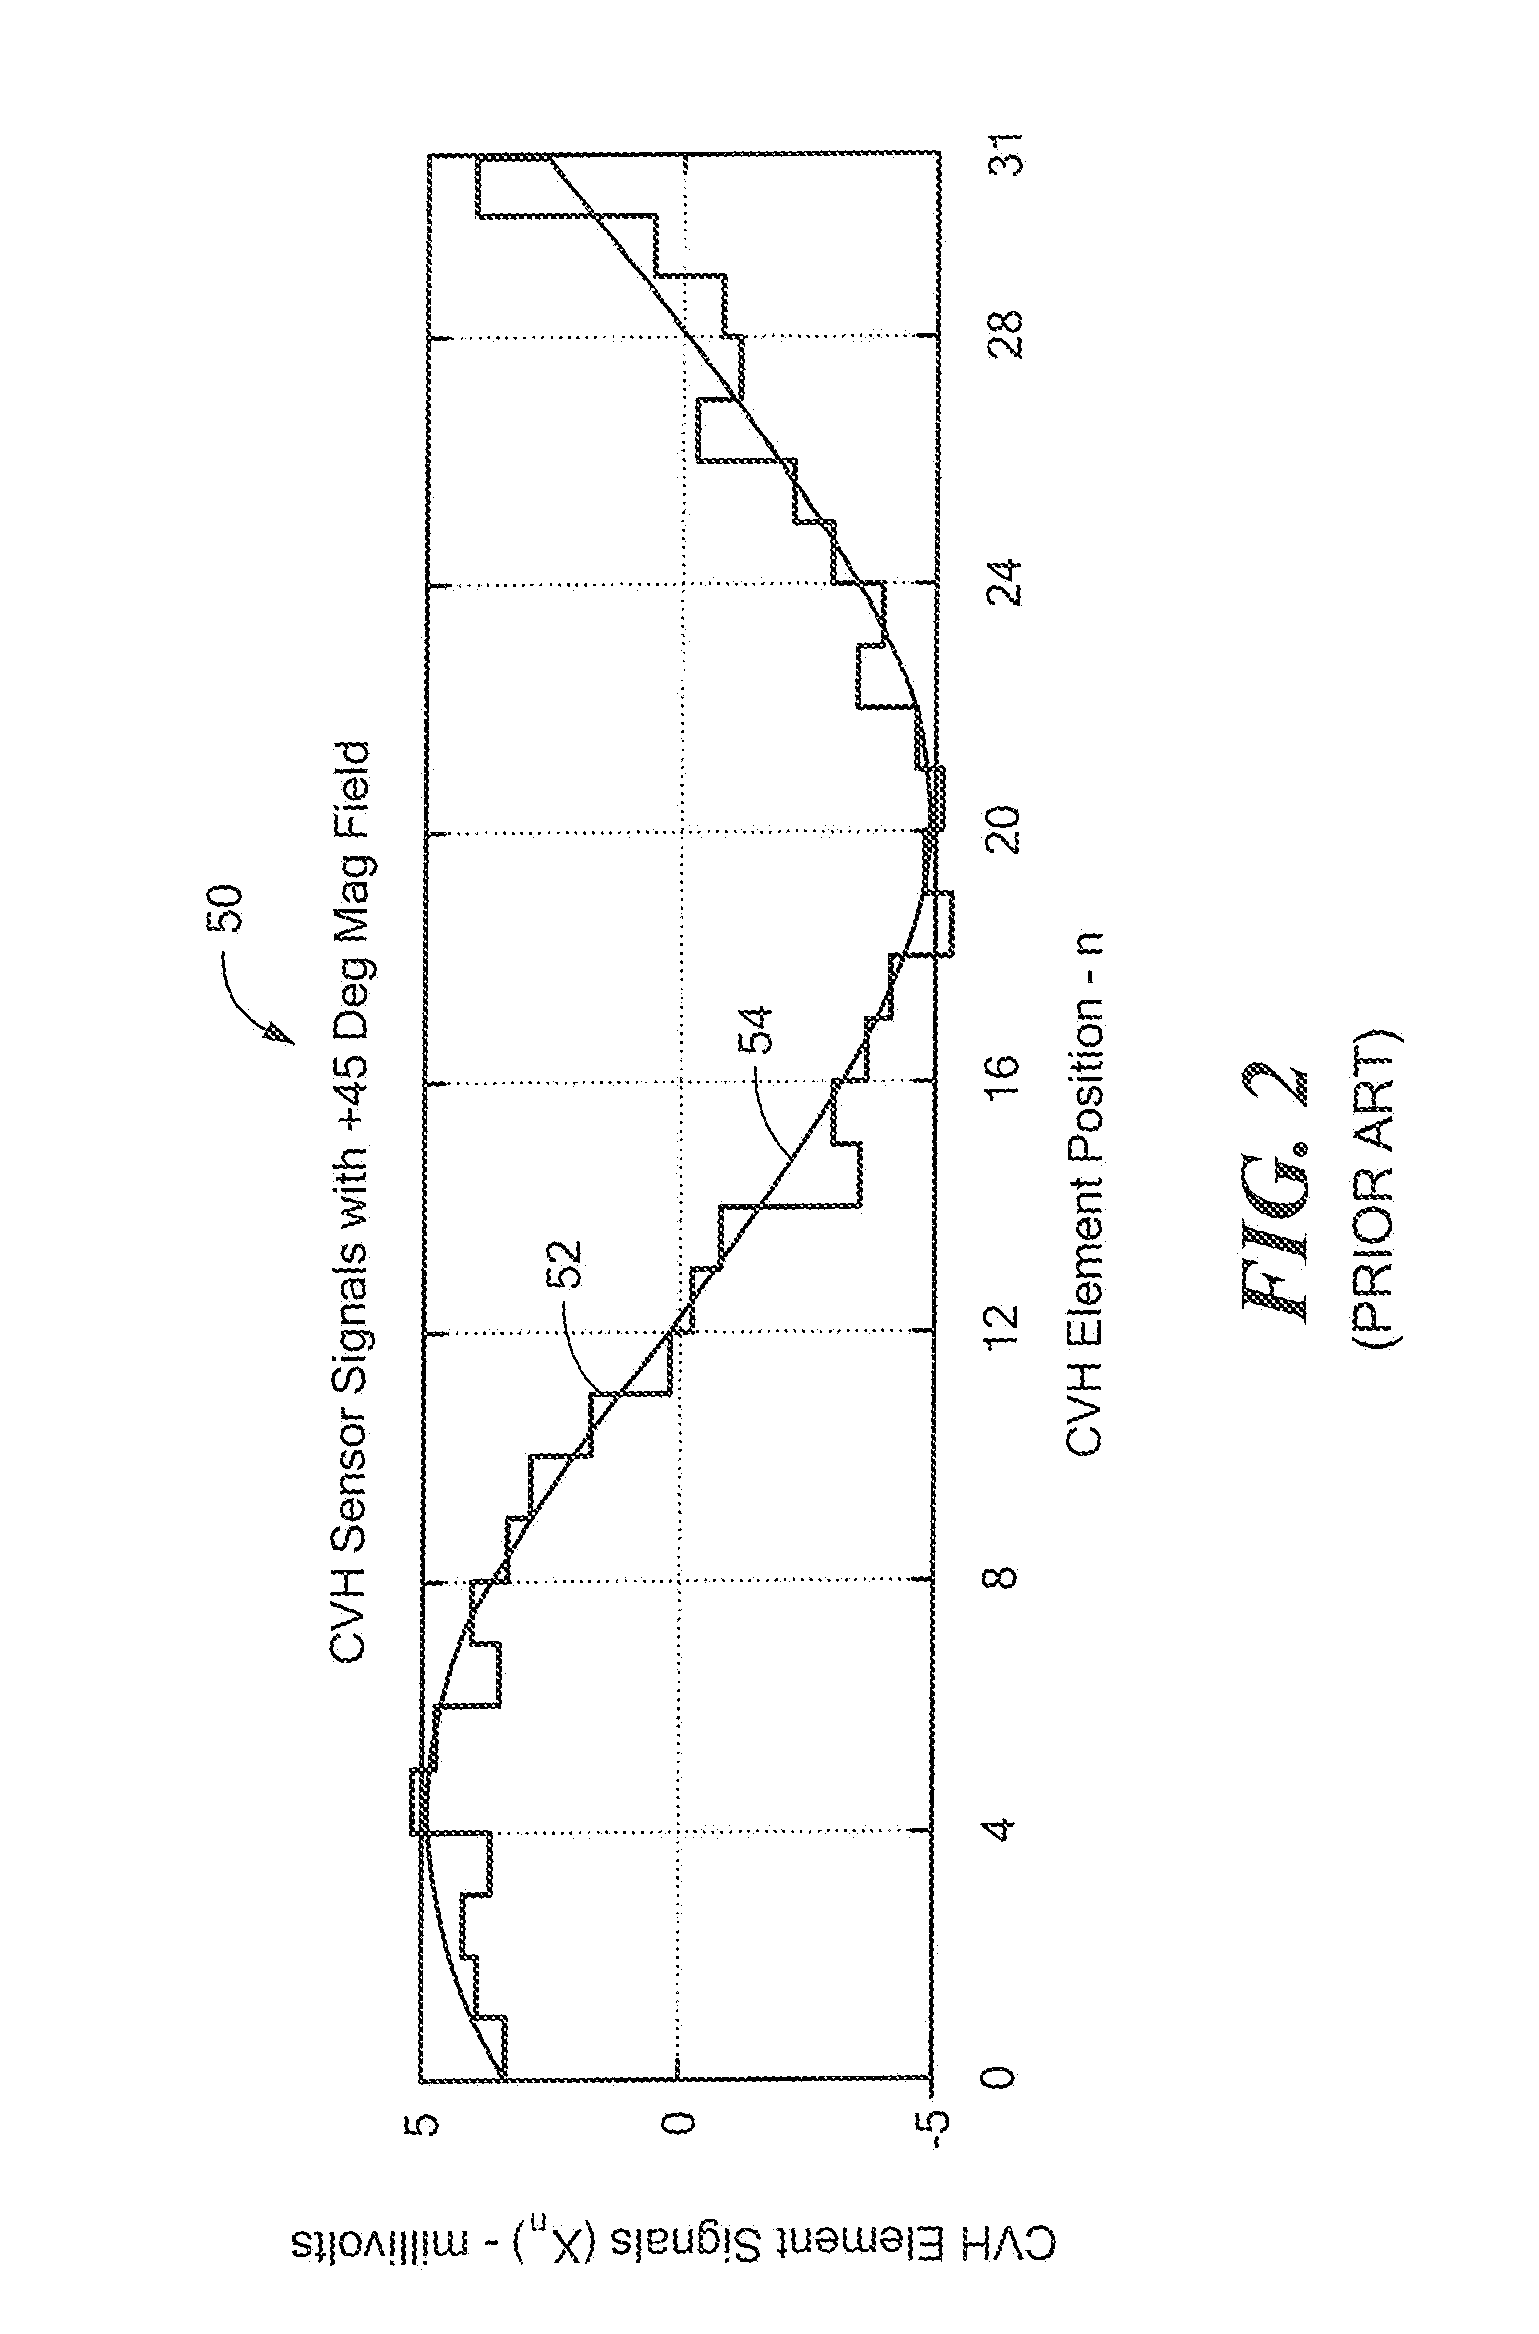 Magnetic Field Sensor And Related Techniques That Inject A Synthesized Error Correction Signal Into A Signal Channel To Result In Reduced Error